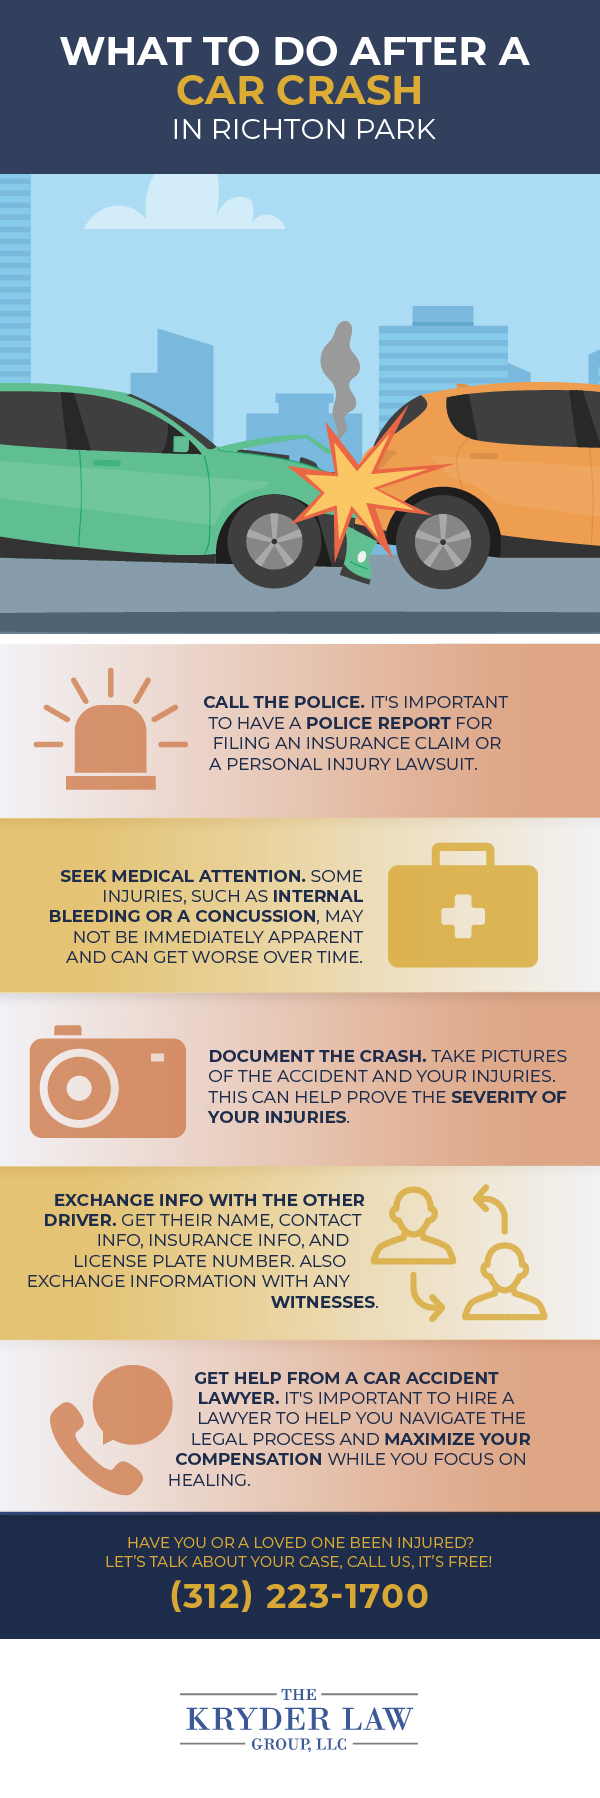 What to Do After a Car Crash in Richton Park Infographic